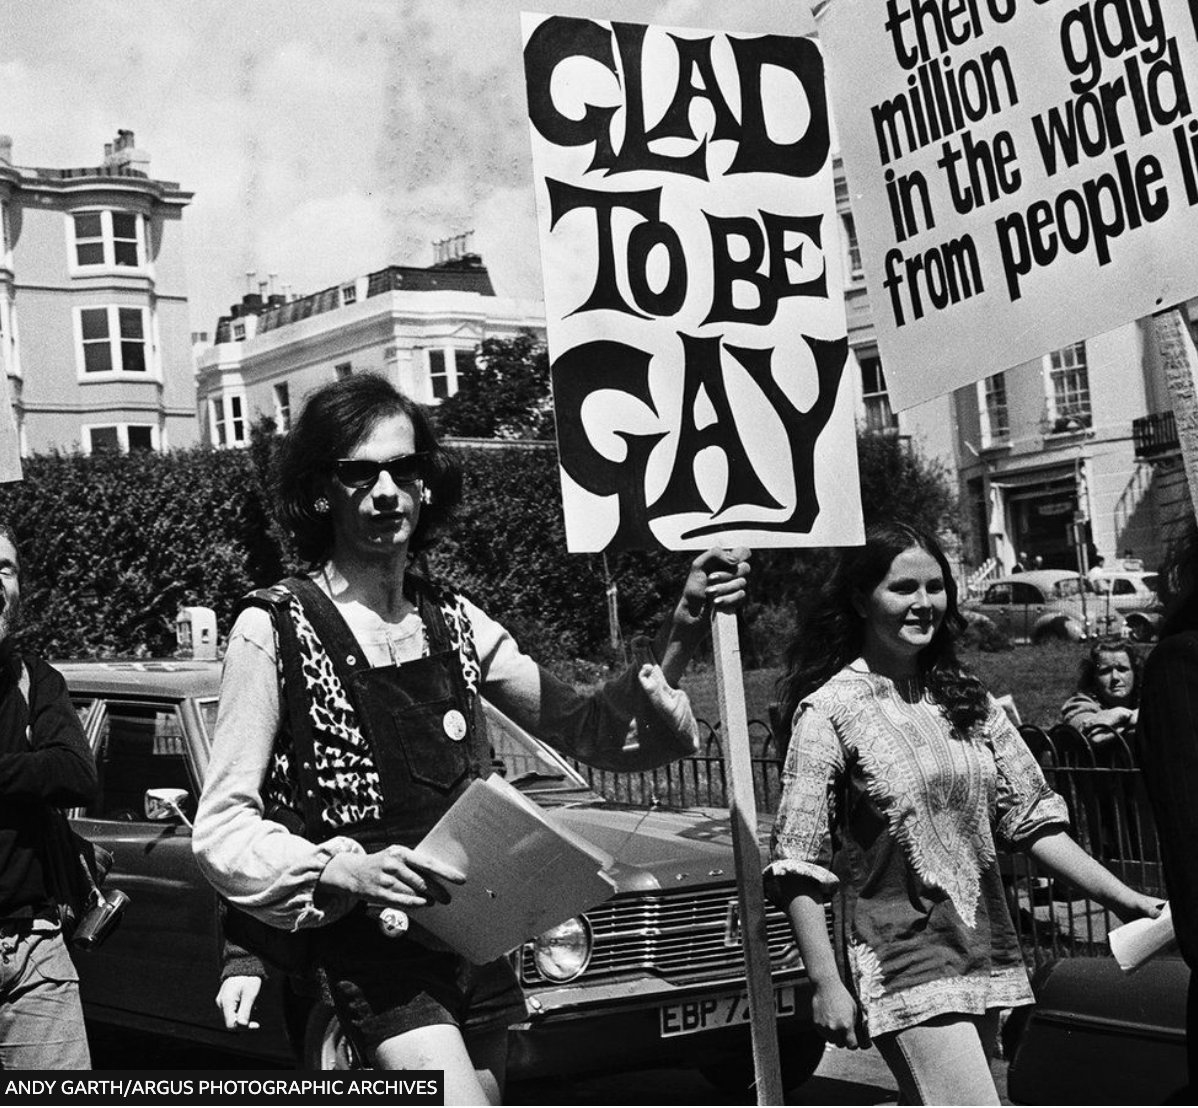 #OnThisDay in 1972, the UK's first Gay Pride march took place. #AllOurPride